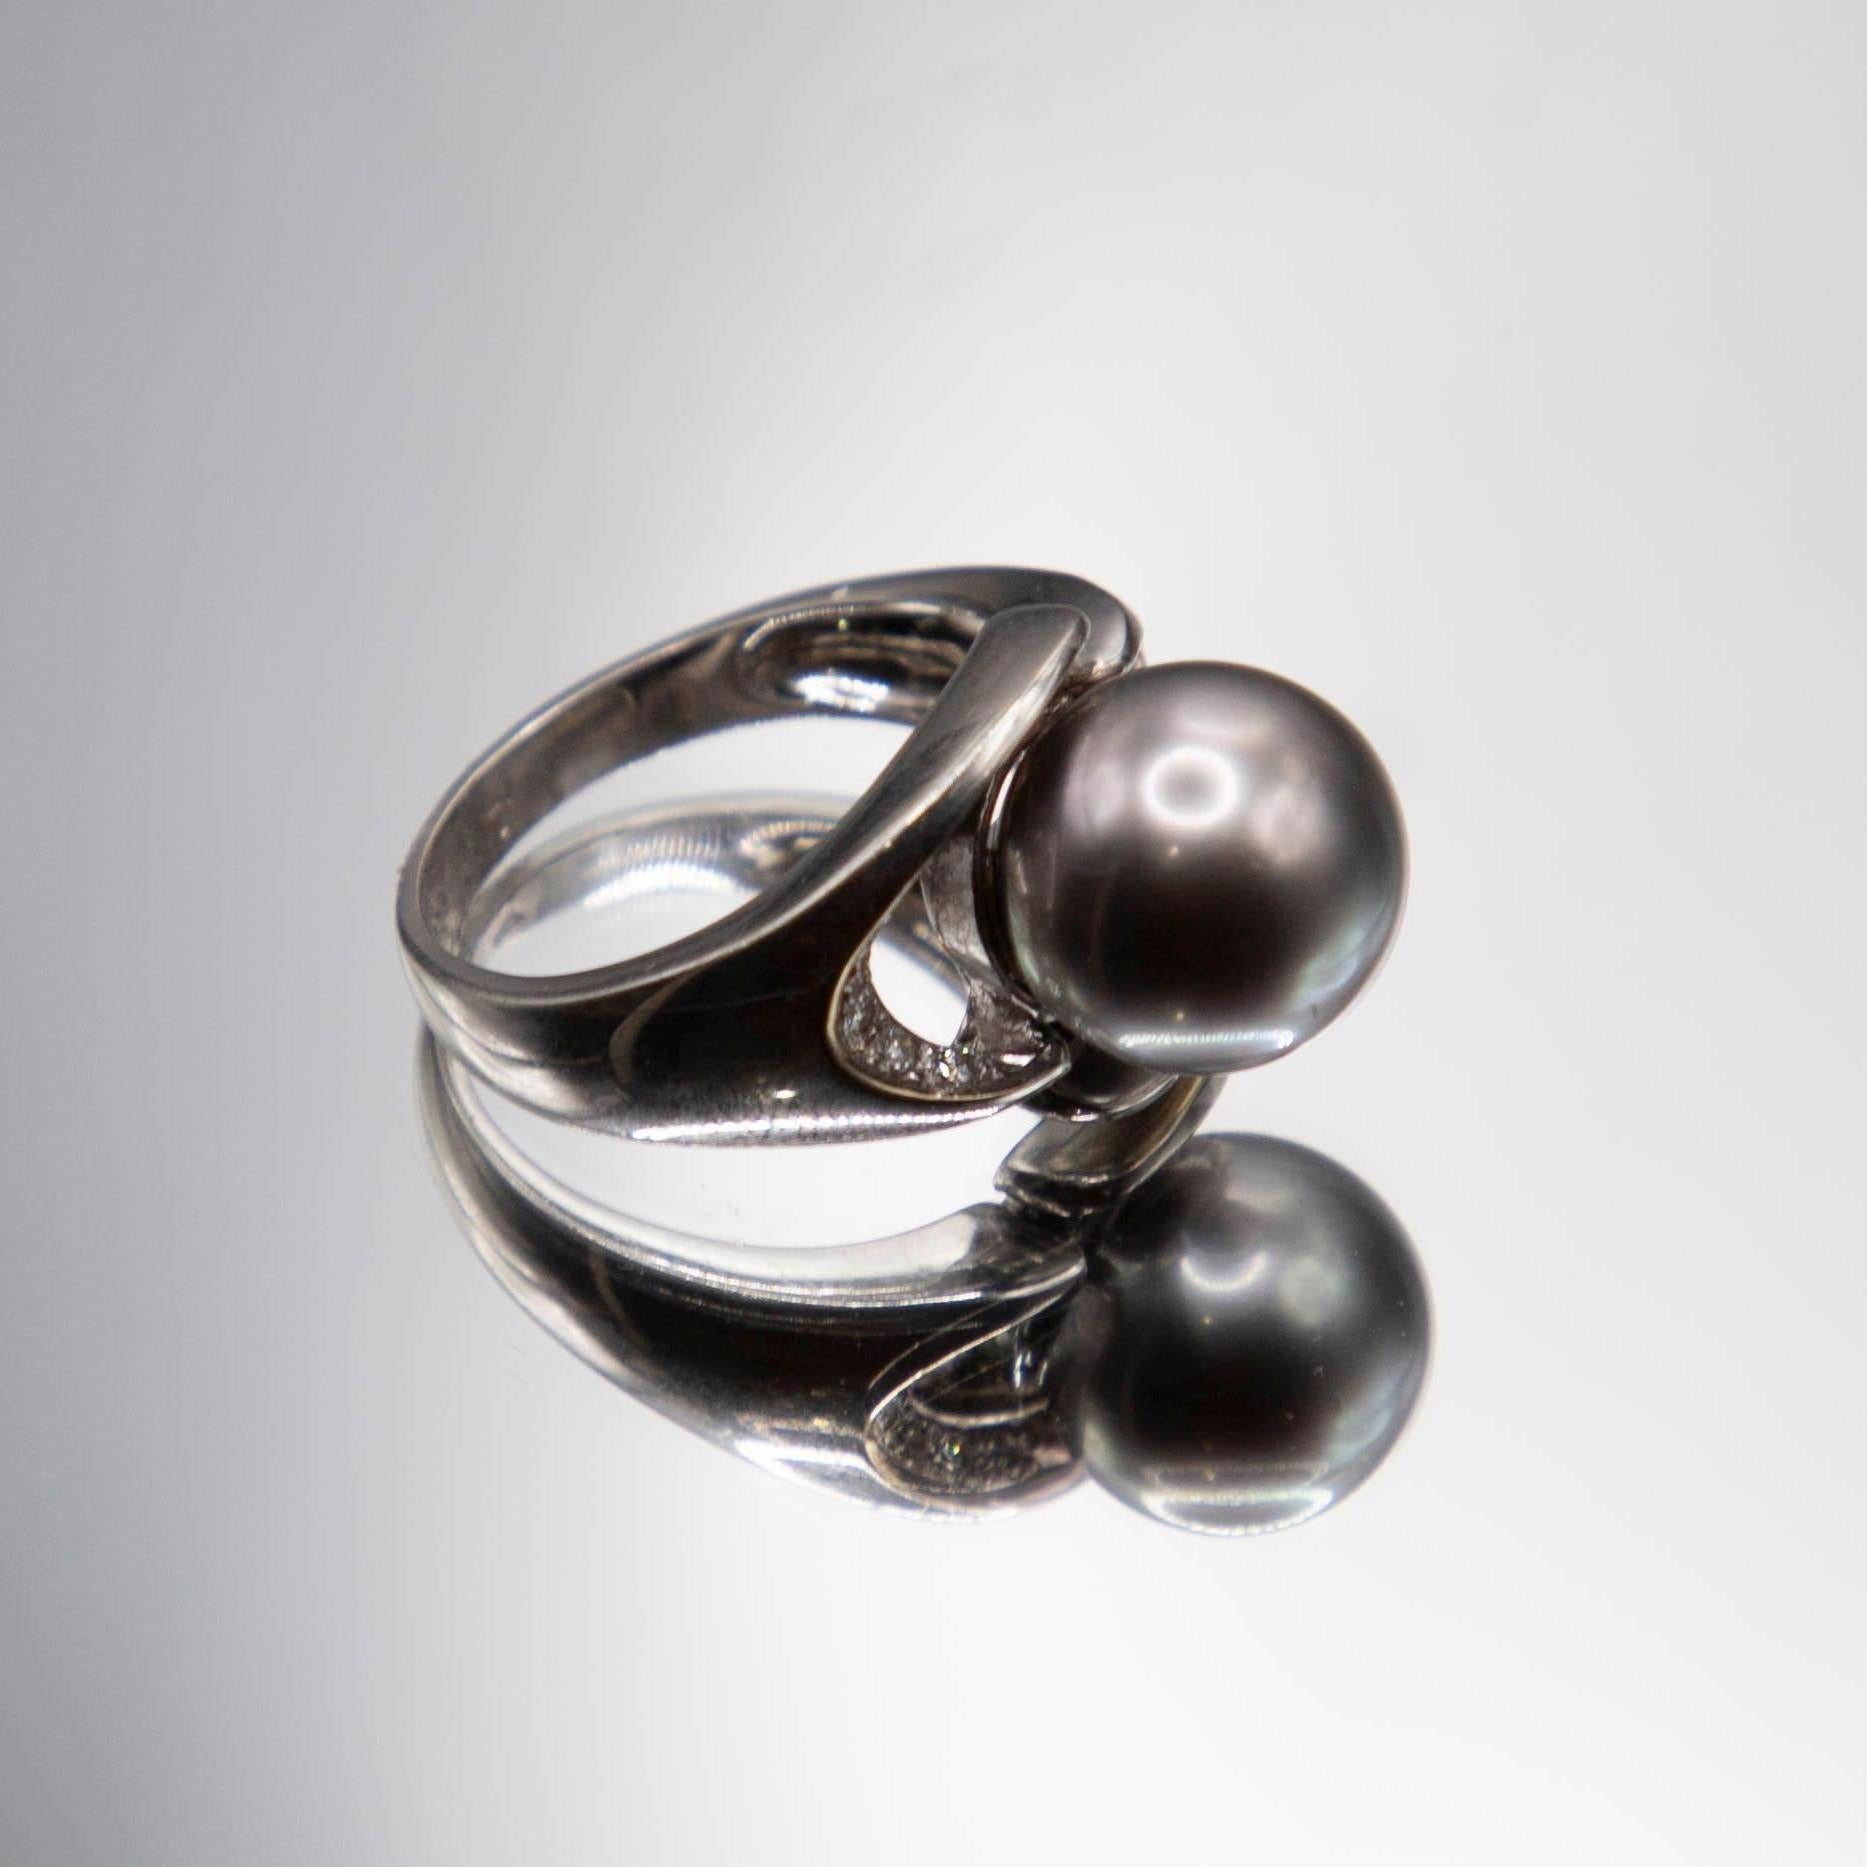 Classic contemporary defines this modified bypass  style 18k white gold ring featuring an important 11mm Tahitian Black South Sea pearl. The beautiful salt water gem displays excellent roundness, very high luster, thick nacre, near flawless